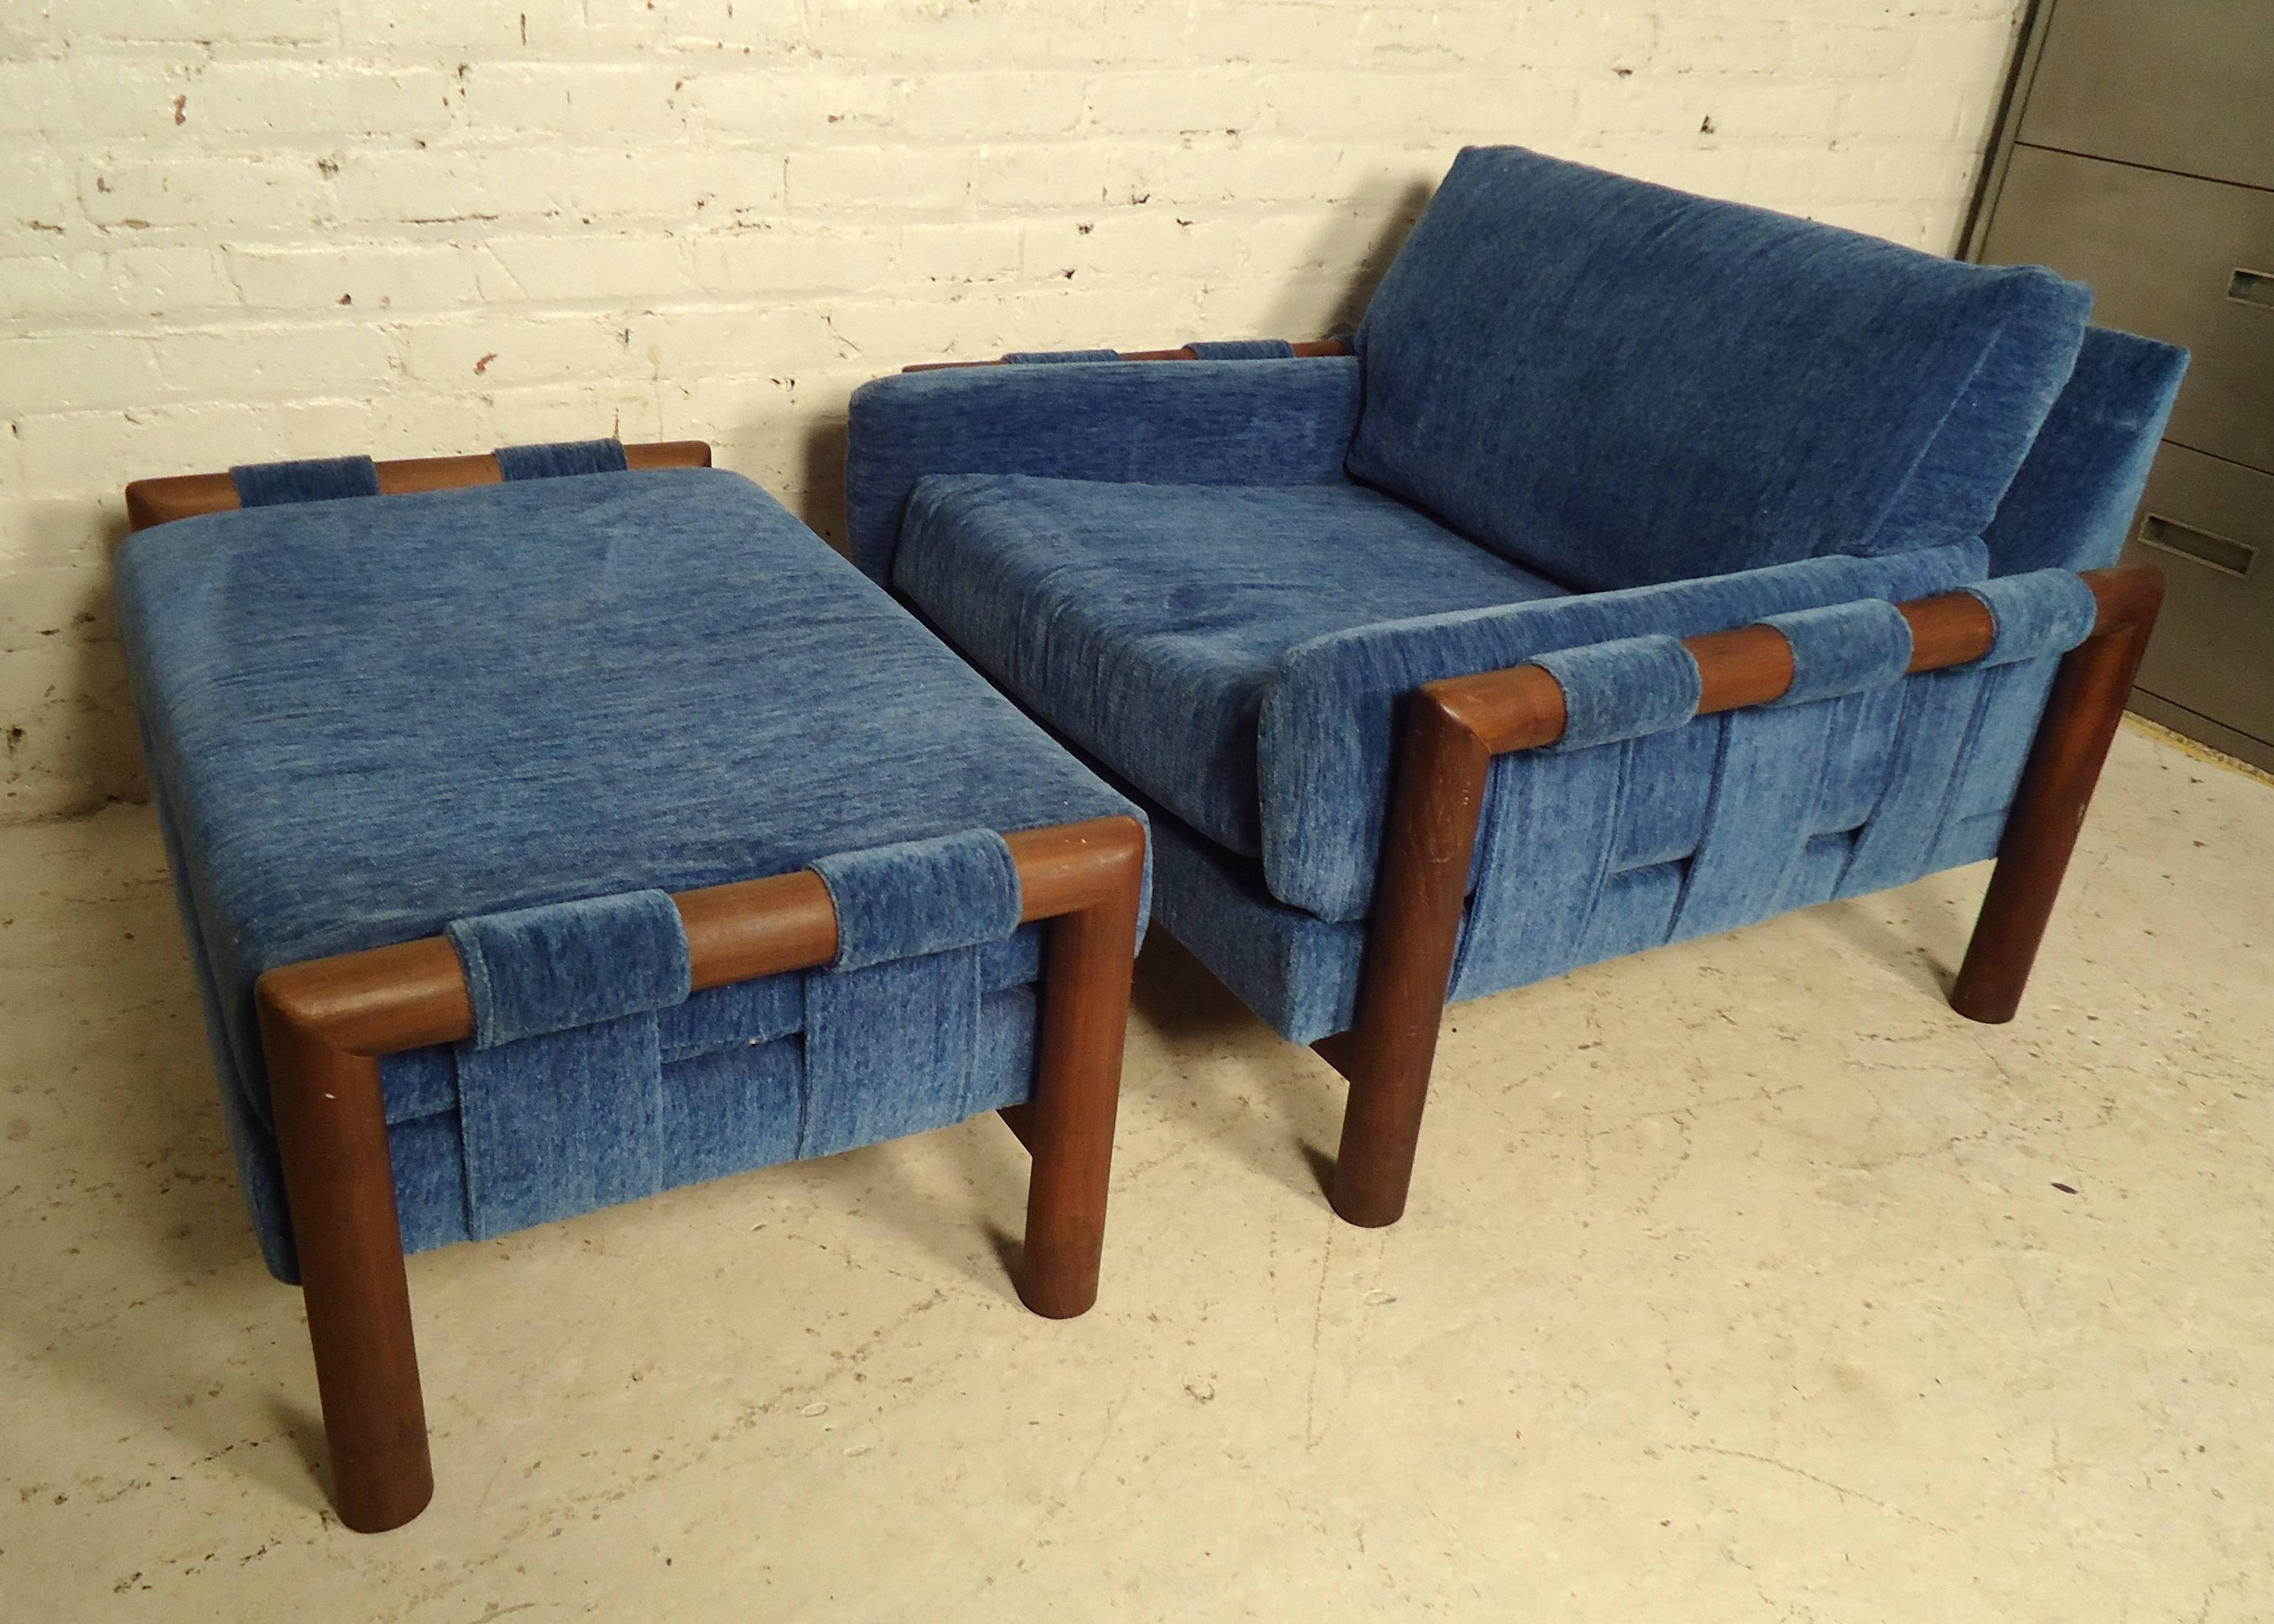 This stylish American lounge chair and ottoman features a sturdy walnut frame, is uniquely low, with comfortable wide upholstered cushions. 

Please confirm item location (NY or NJ).